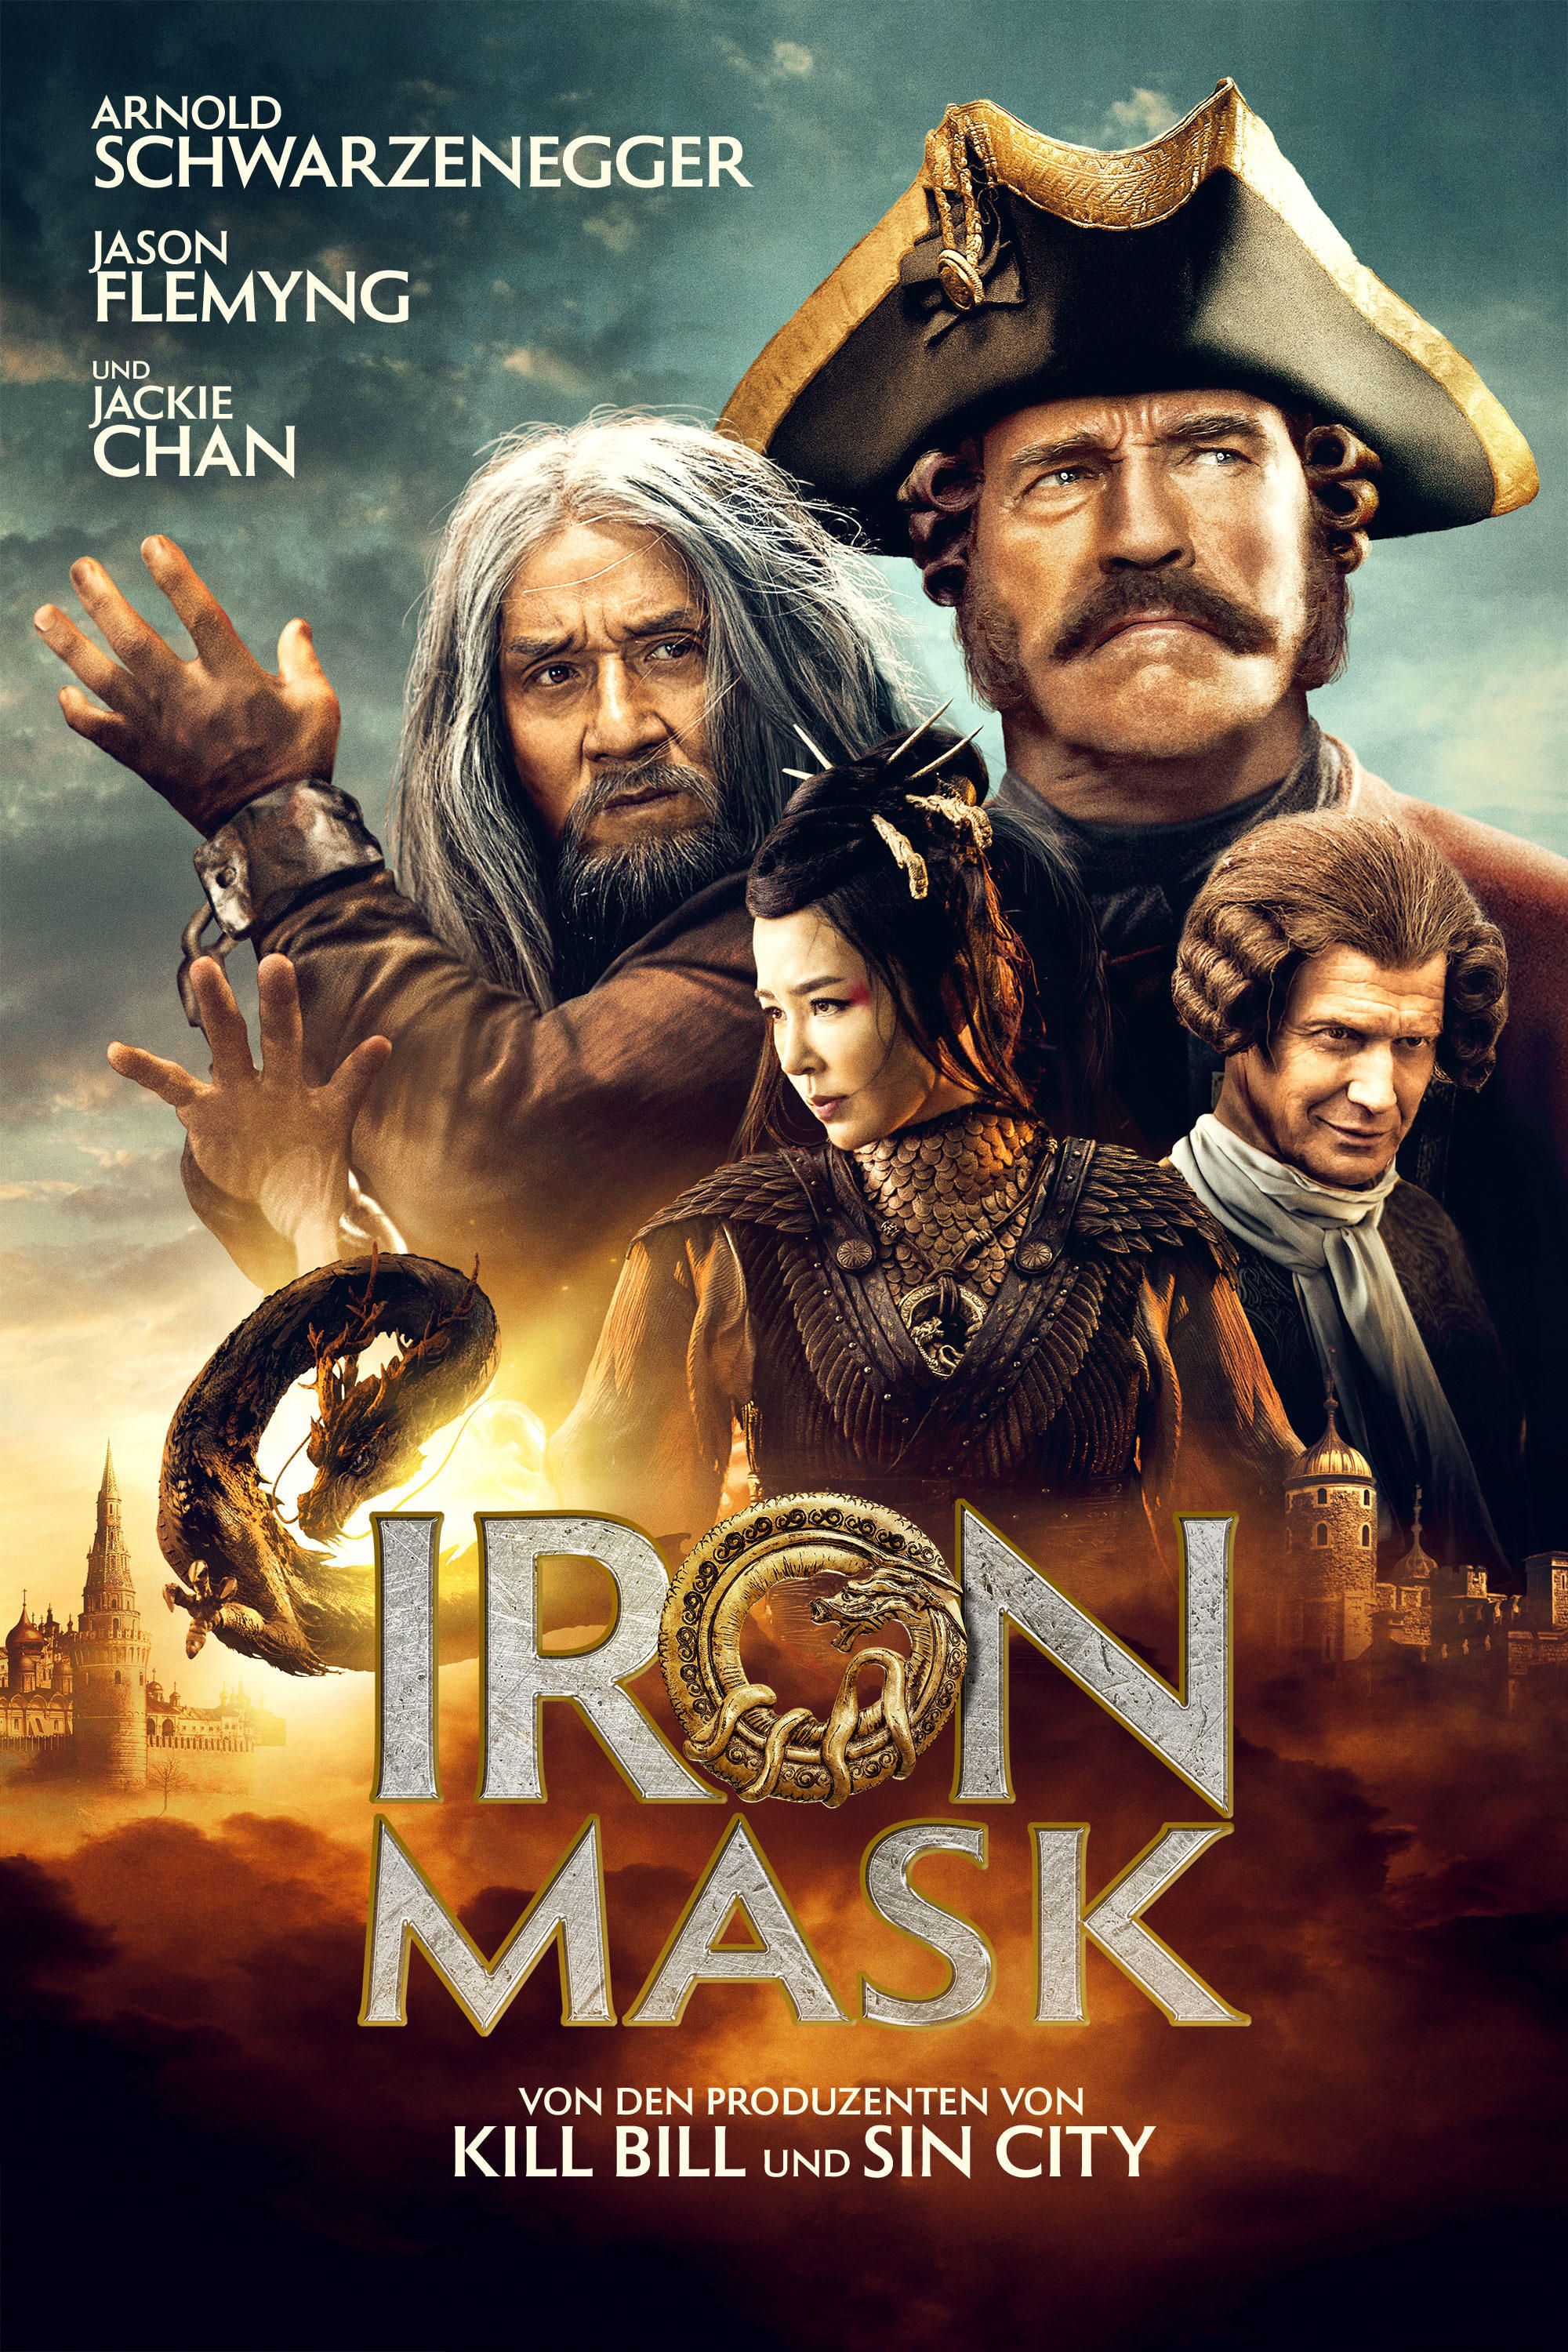 Iron Mask (2020) Movie Information & Trailers